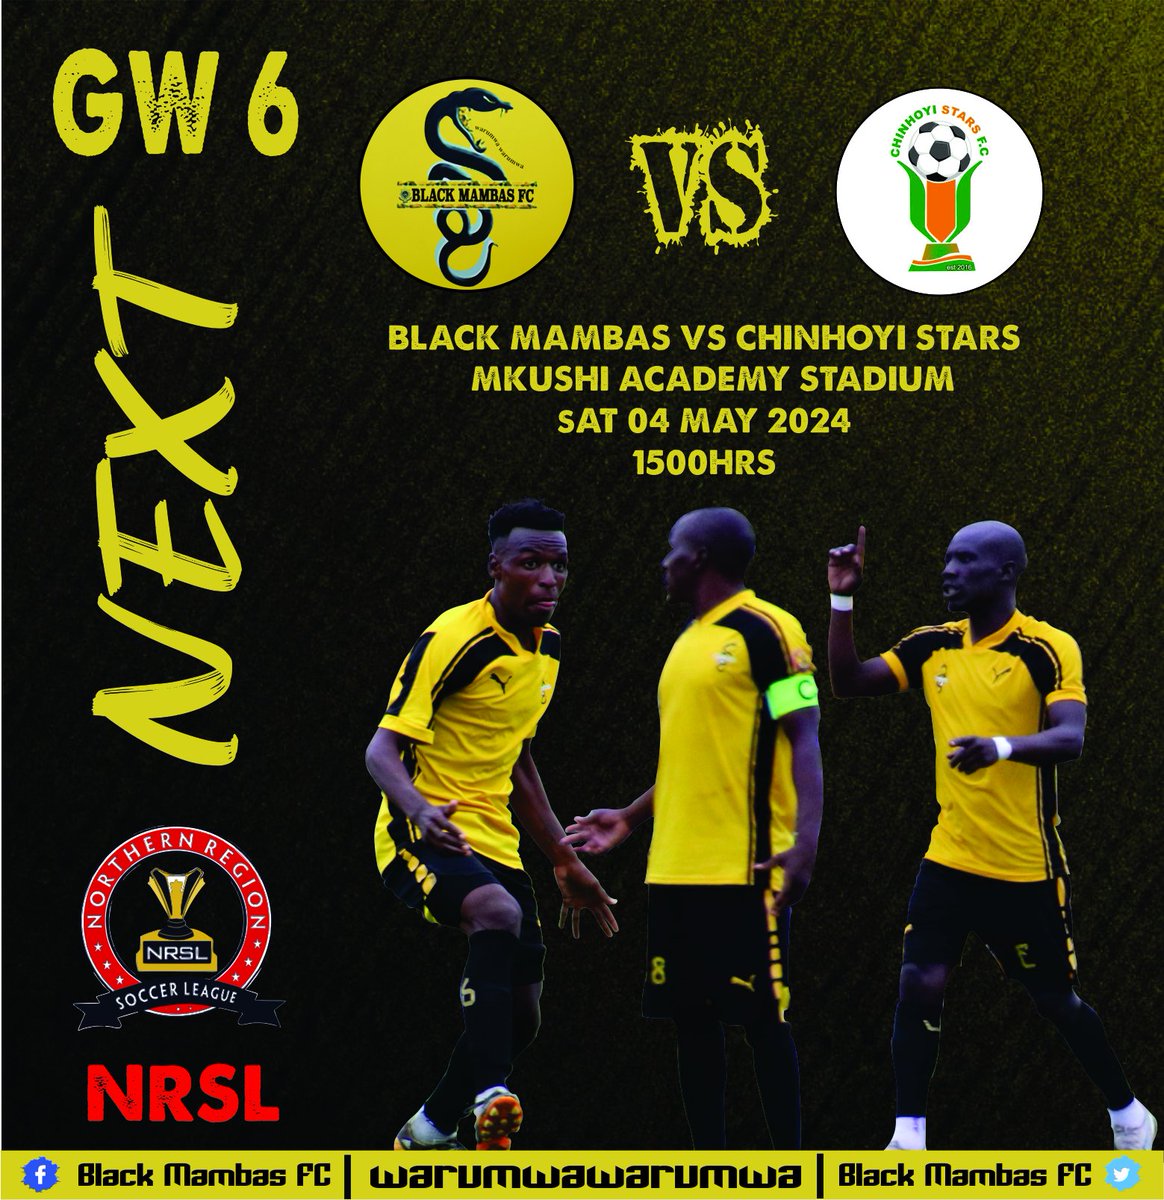 Embrace the new day, the fresh week, and the beginning of a new month. Let’s hit the restart button, Mambilo! We’re thrilled to host Chinhoyi Stars this Saturday, May 4, 2024. The match kicks off at 3:00 PM sharp. Join us in large numbers and cheer for our team! #WARUMWAWARUMWA